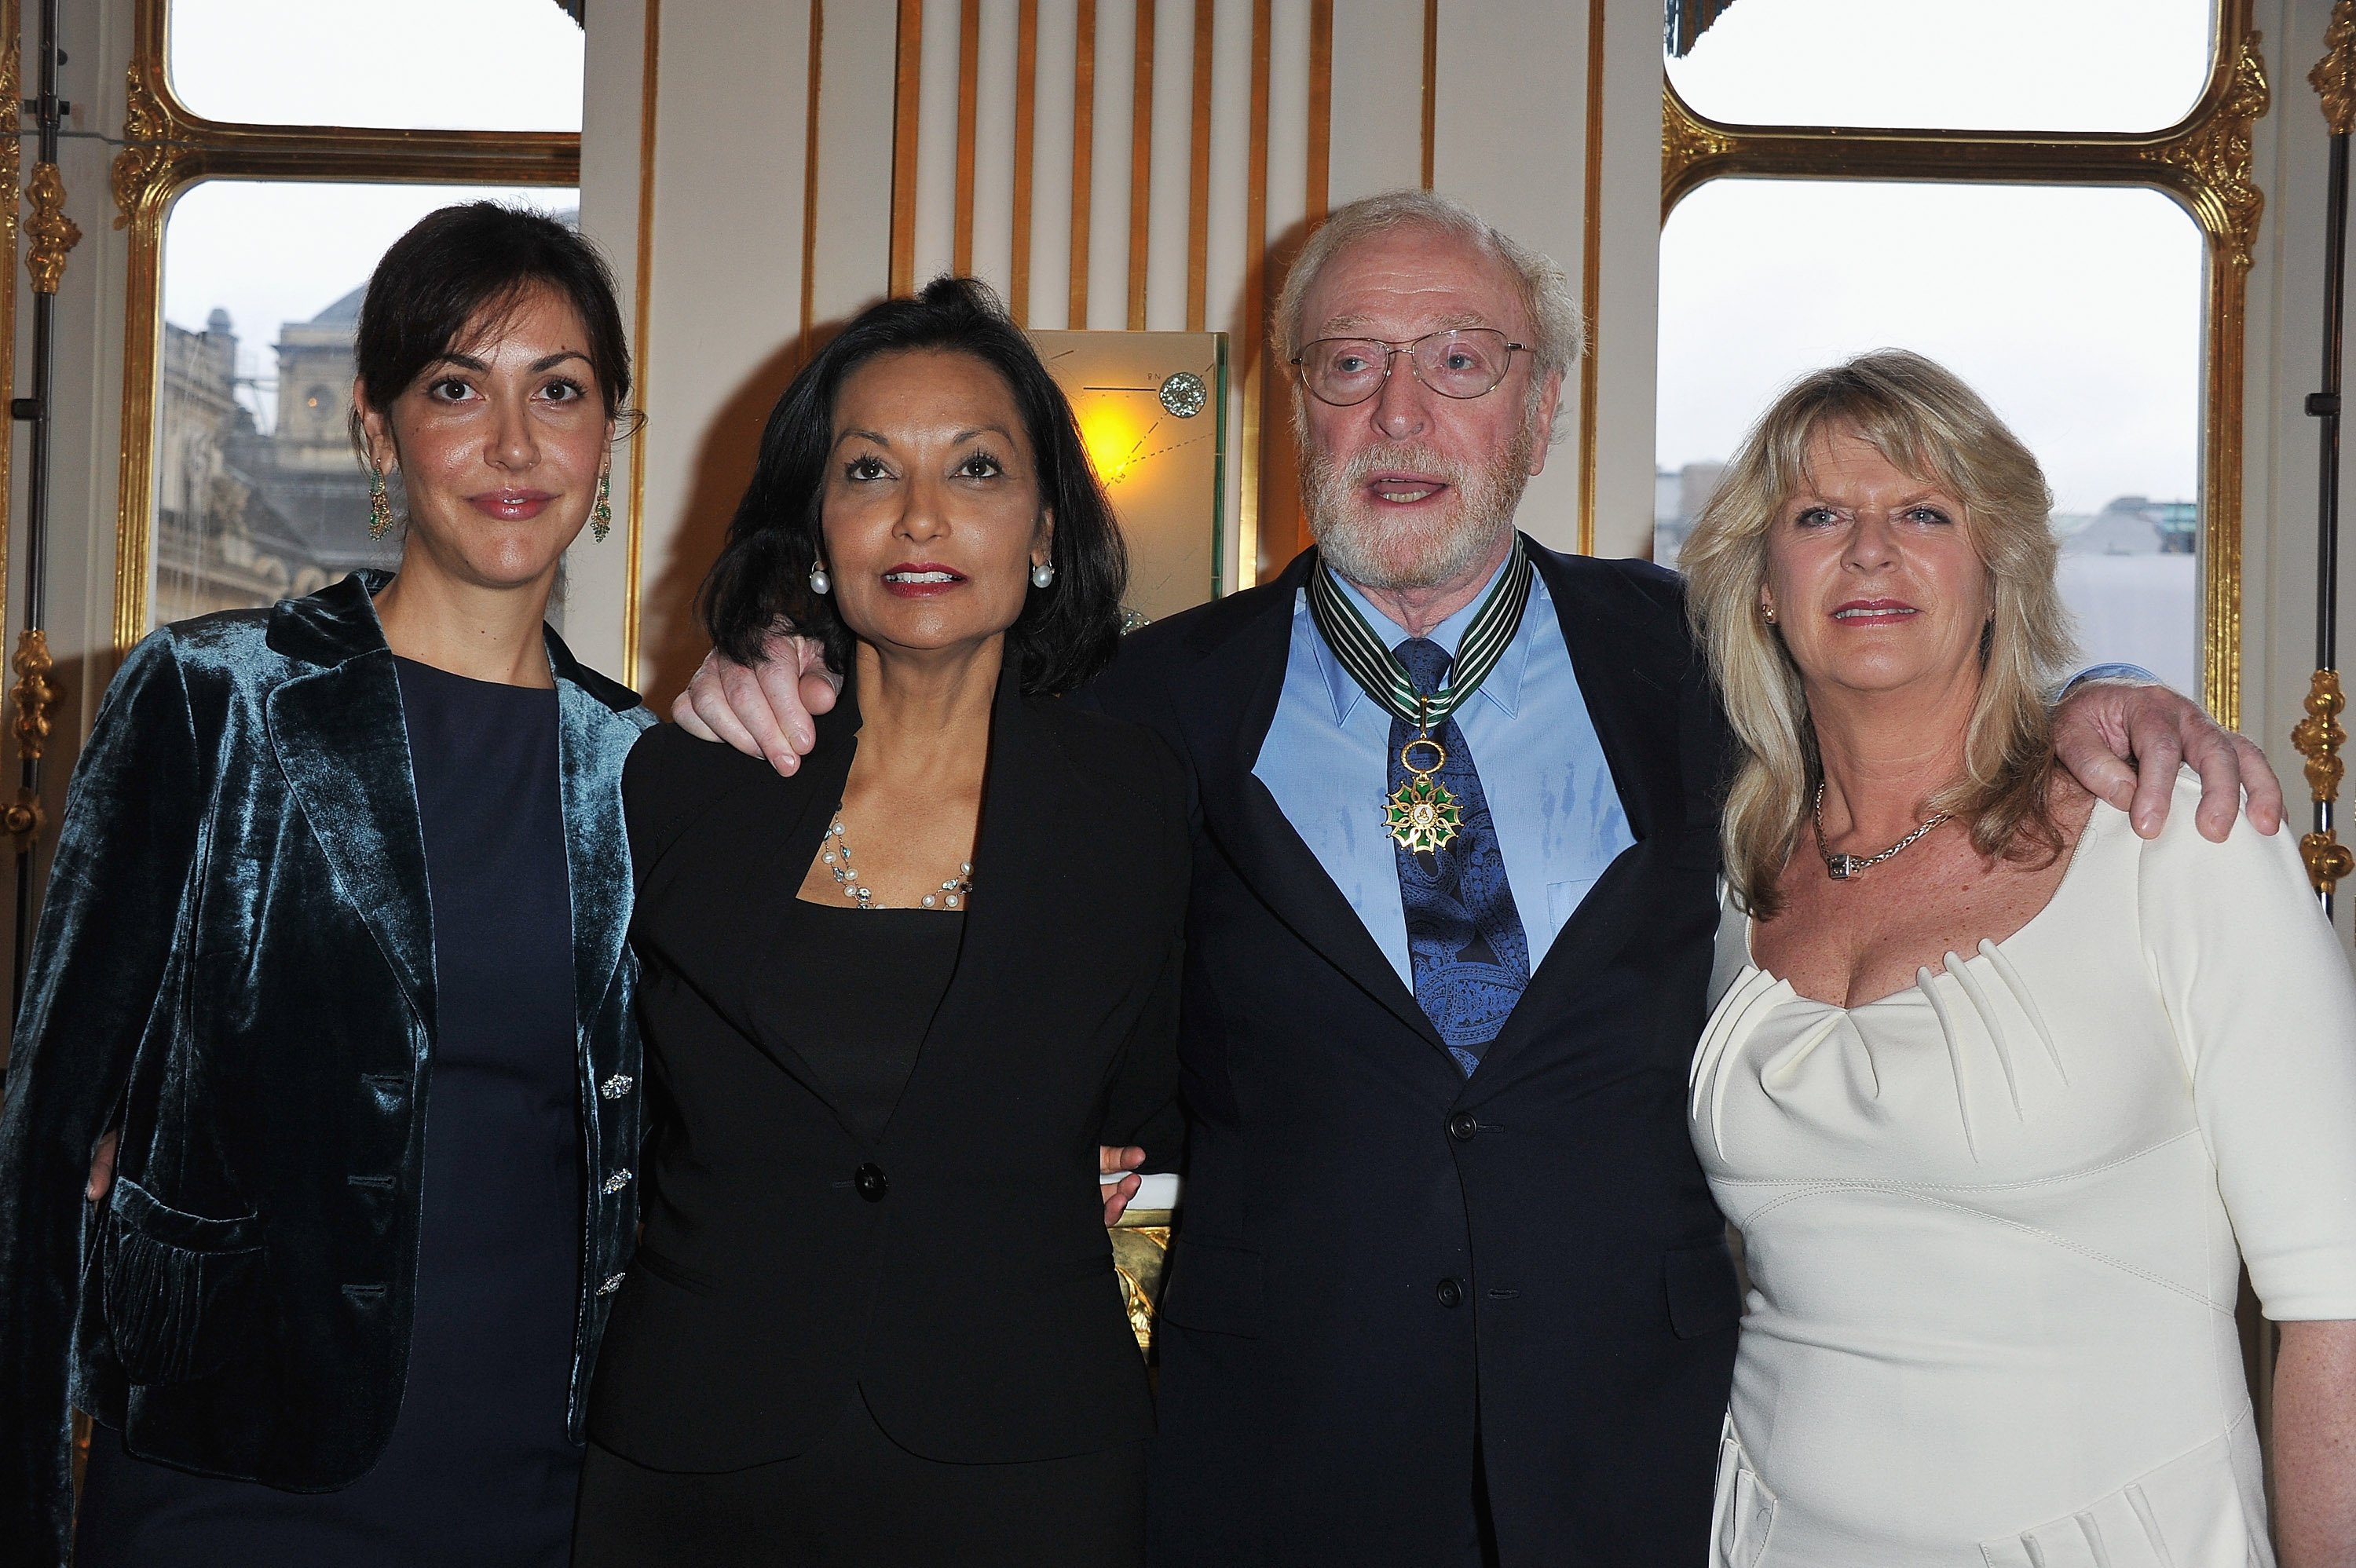 Actor Sir Michael Caine poses with daughters Natasha (L) and Dominique (R) and his wife Shakira (2ndL) after being awarded "Commandeur des arts et des lettres" by French Culture Minister Frederic Mitterrand at Ministere de la Culture on January 6, 2011 in Paris, France | Source: Getty Images 